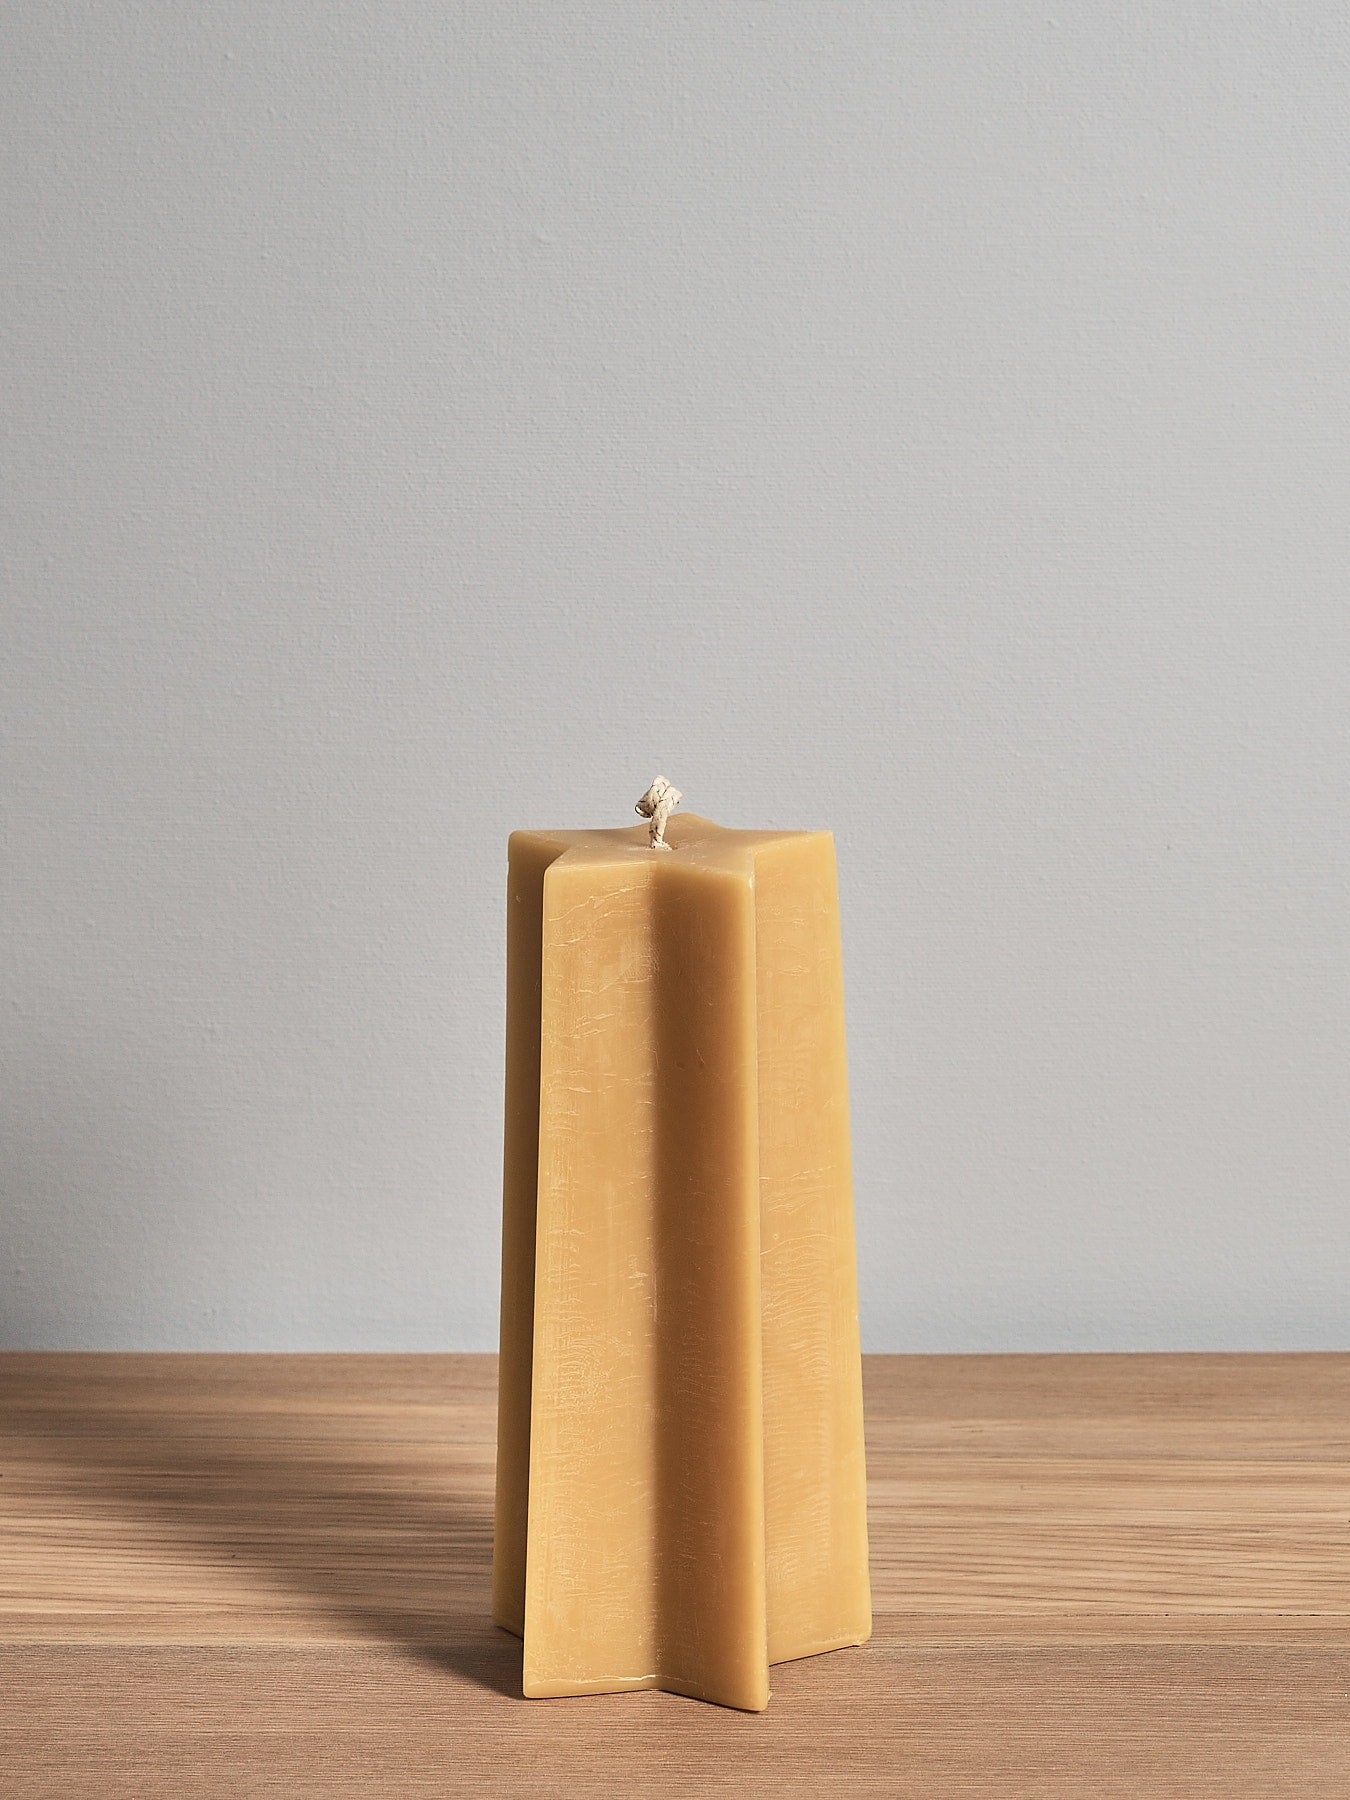 A Star Pillar Candle by Hohepa Candles sitting on top of a wooden table.